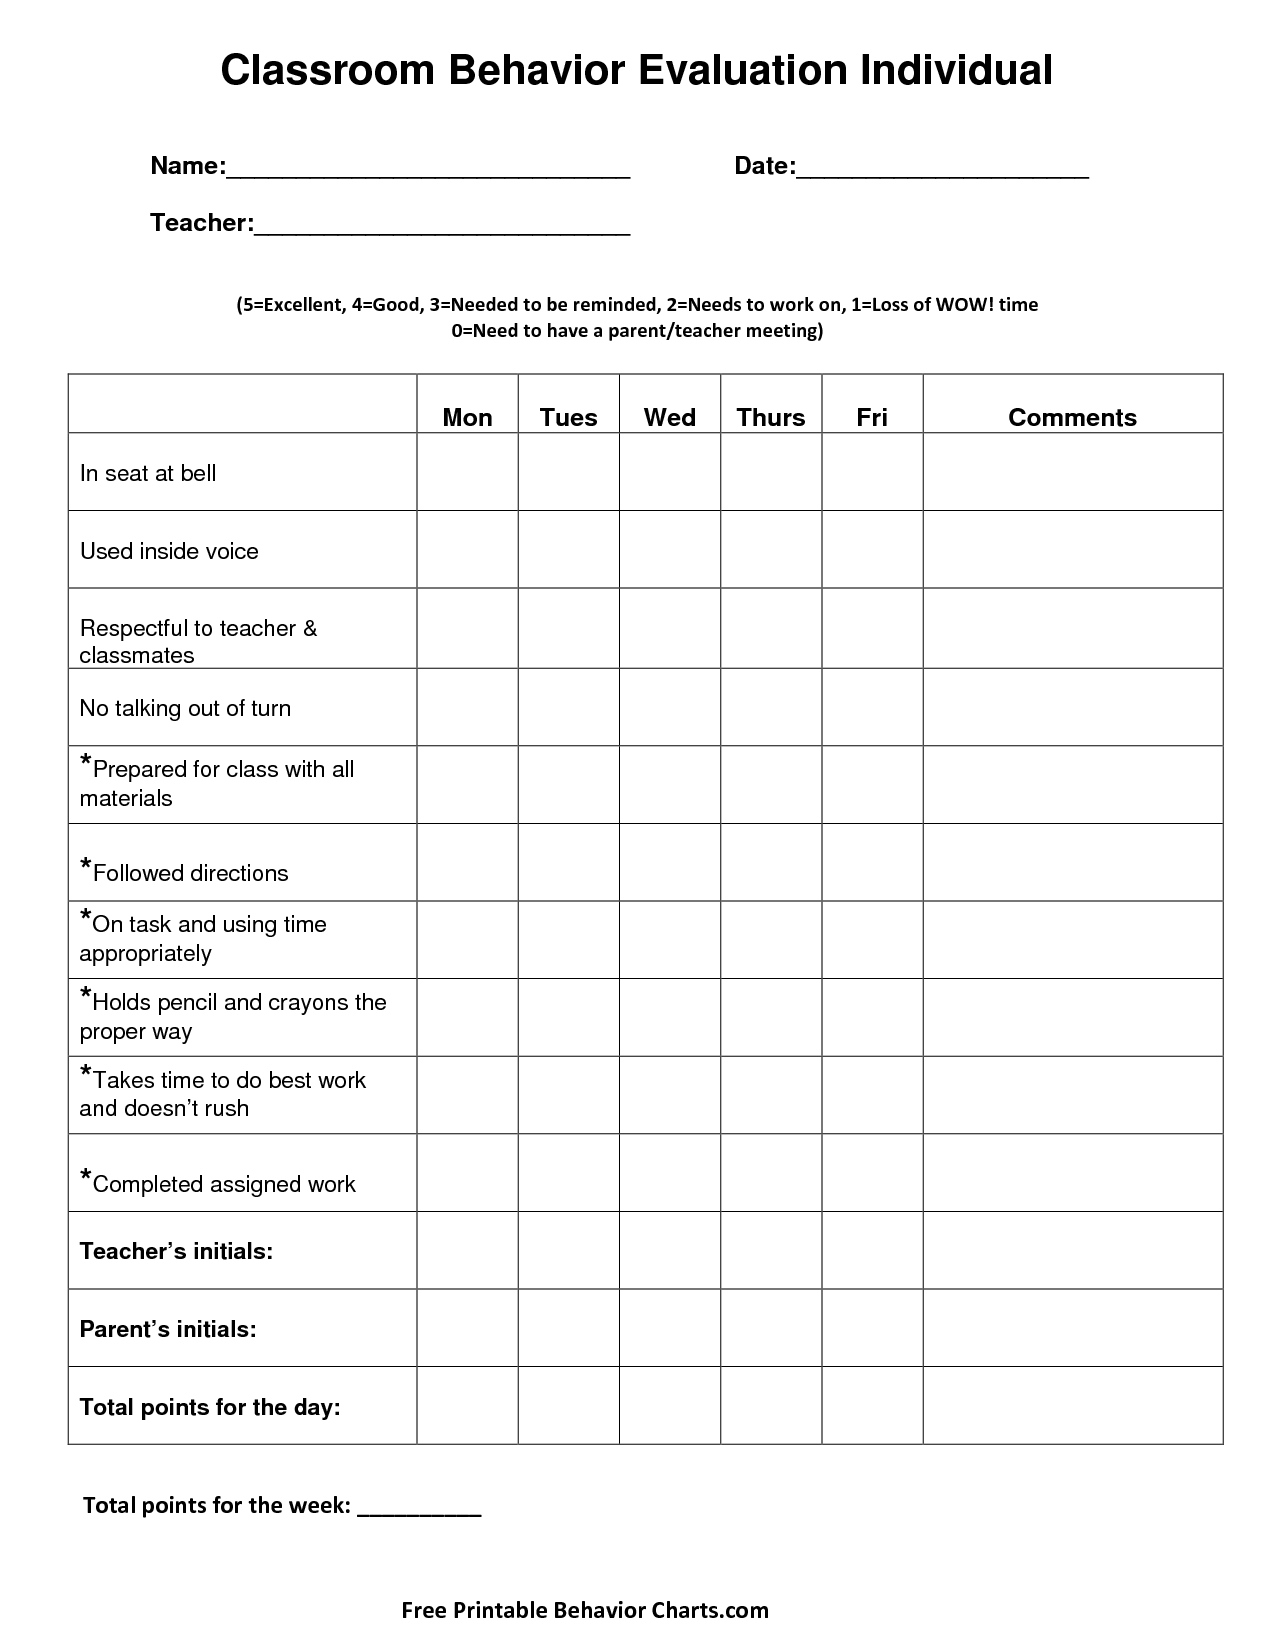 The Point System Serves To Give The Student An Overall Behaviour - Free Printable Incentive Charts For School